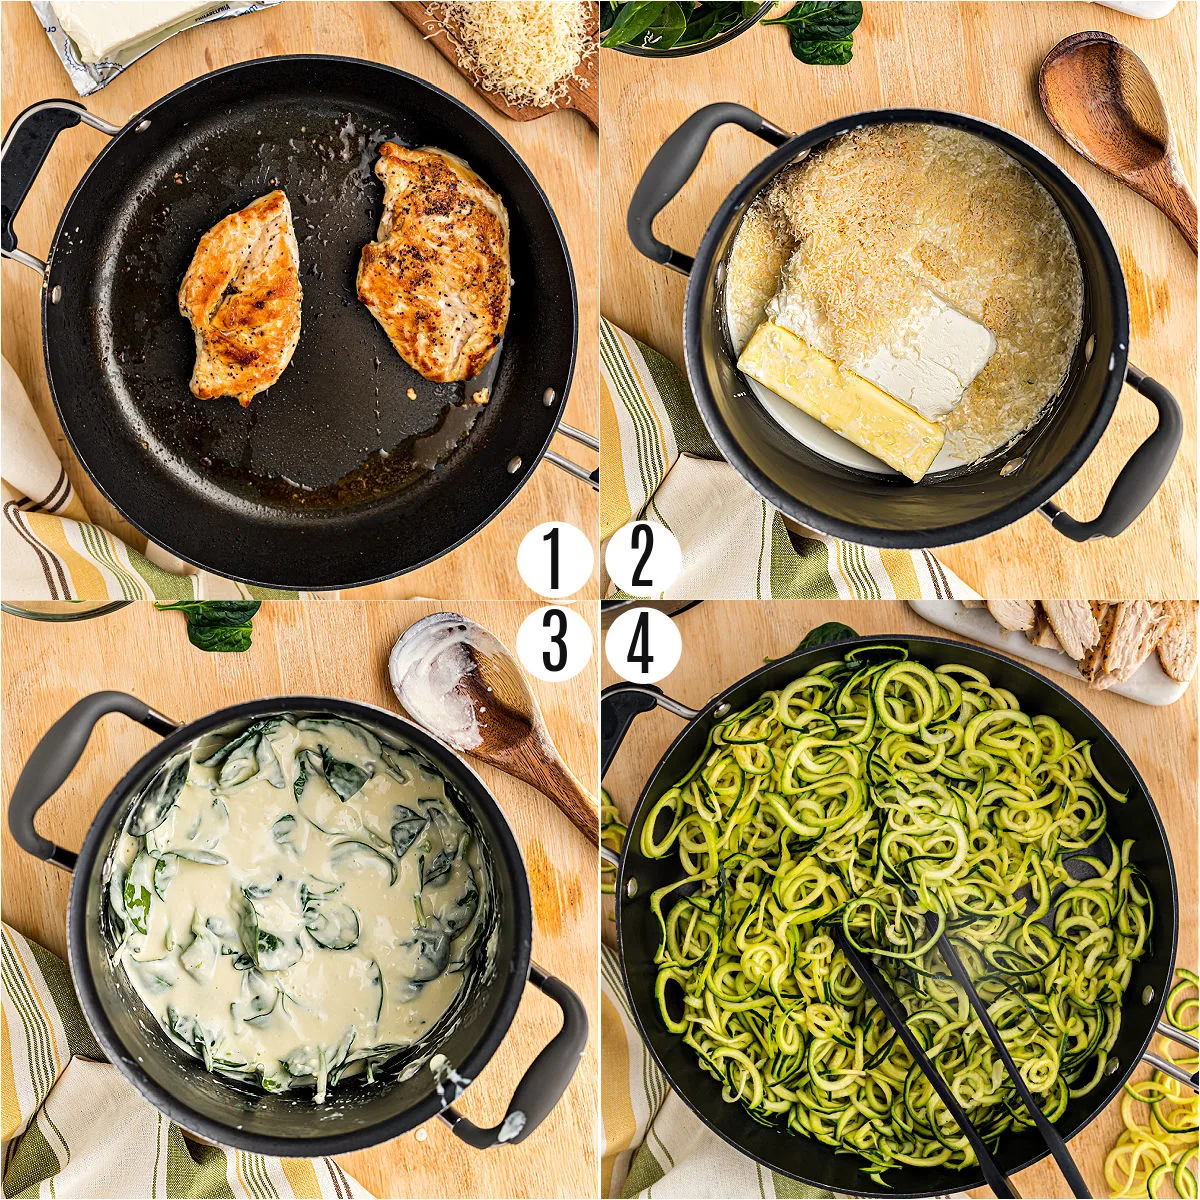 Step by step photos showing how to make chicken alfredo zoodles.